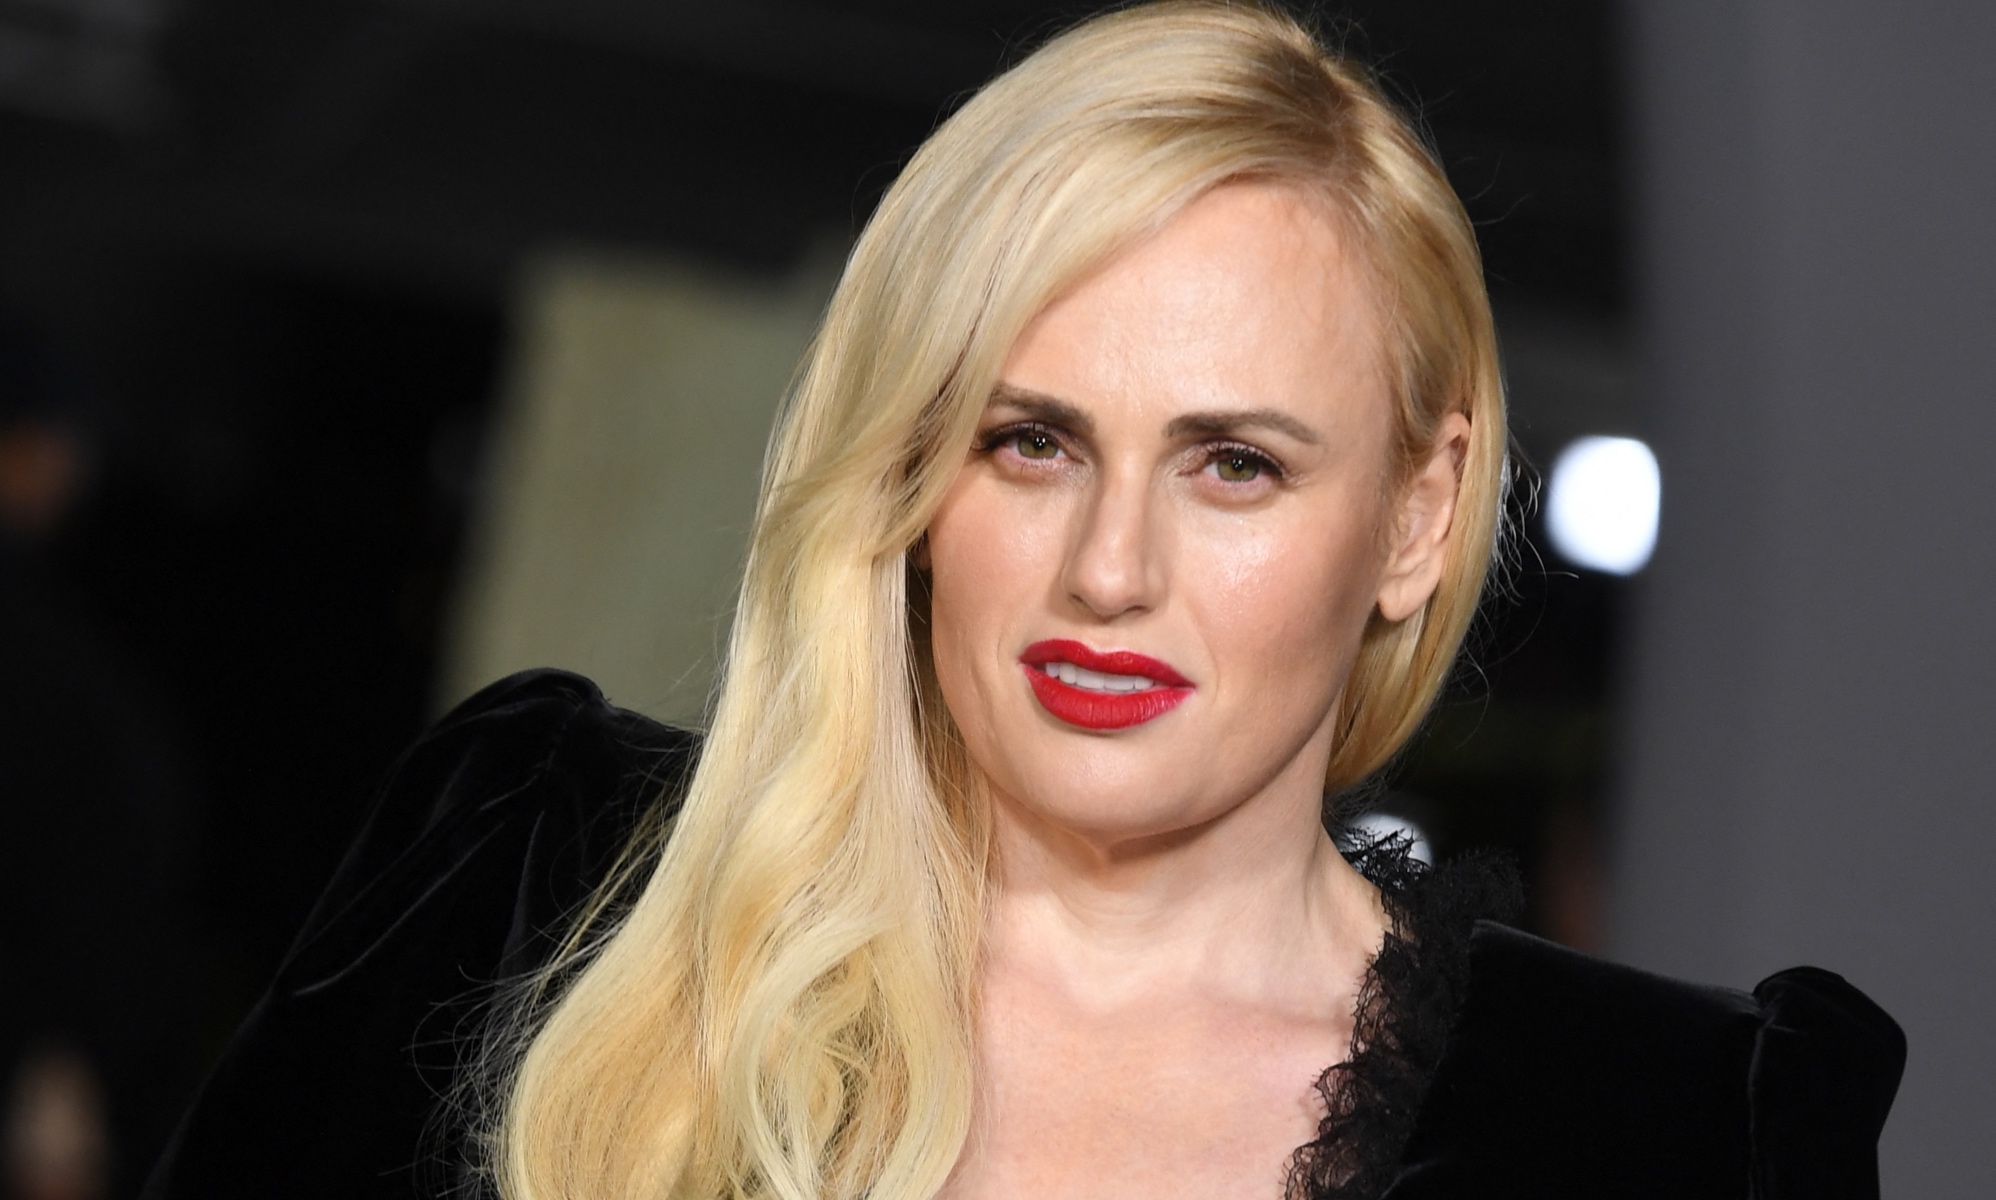 Journalist who threatened to out Rebel Wilson as gay addresses backlash ...